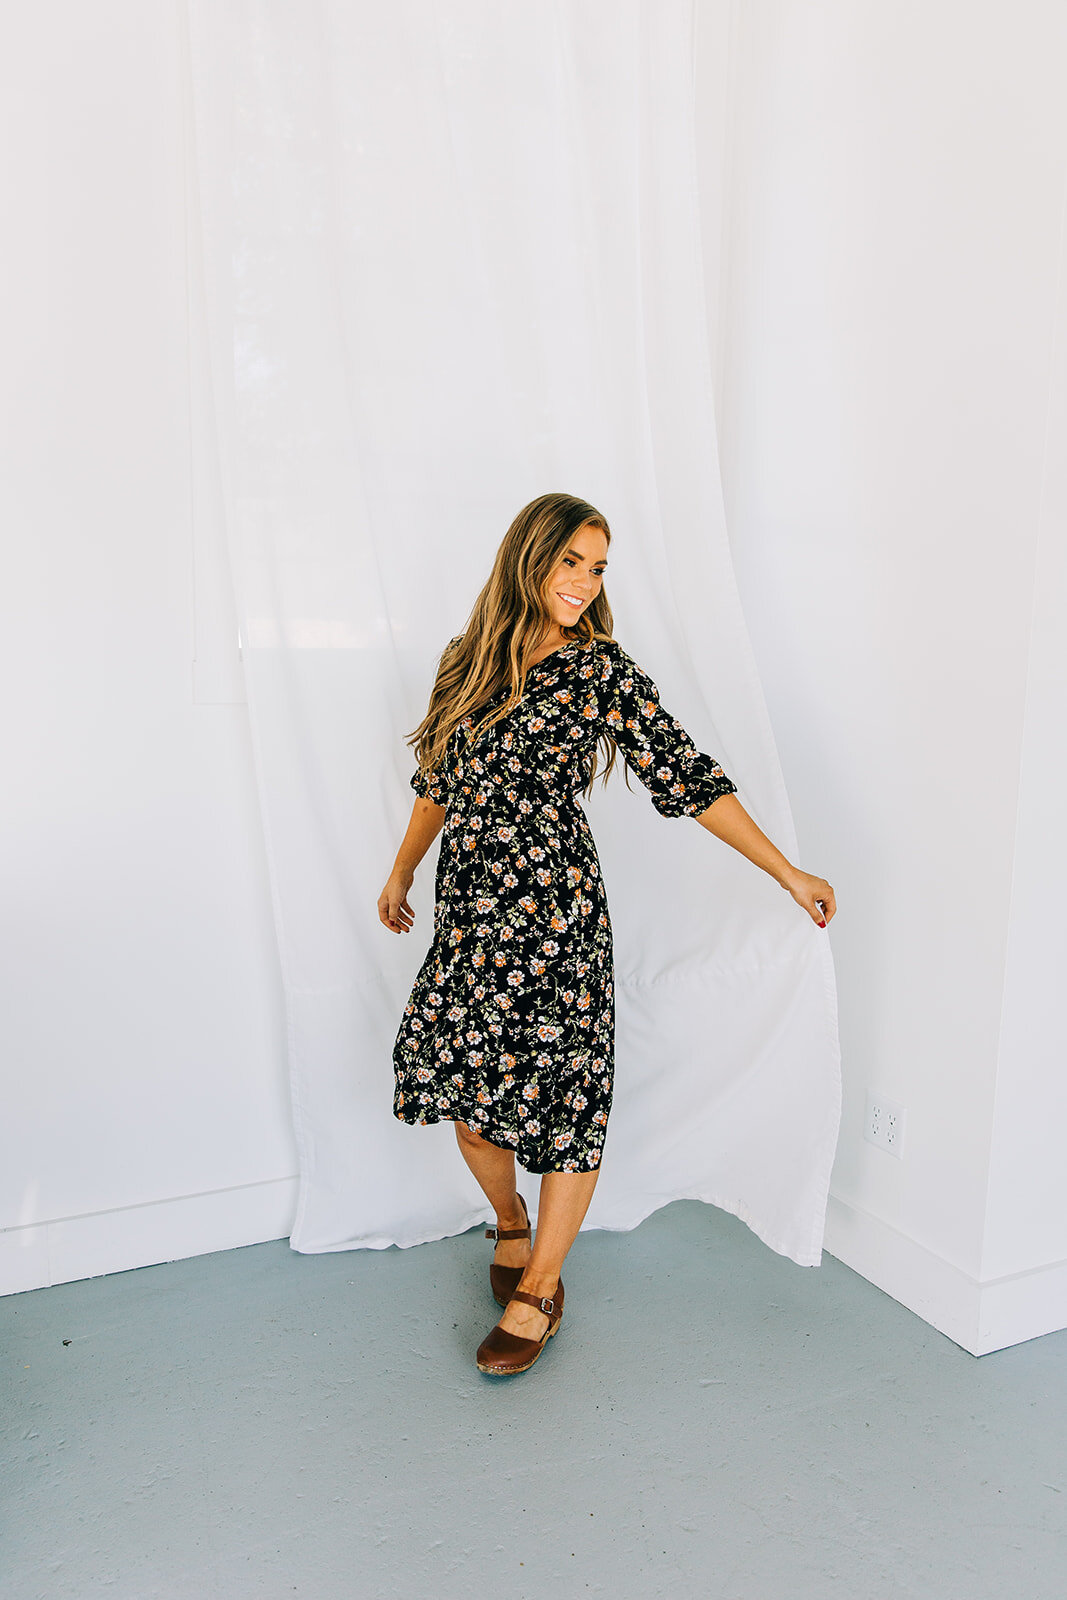  online clothing boutique women’s fashion black boho dress with small flower details product photography clothing photo shoot in station studio river heights utah white backdrop natural light studio professional product photography bella alder photog